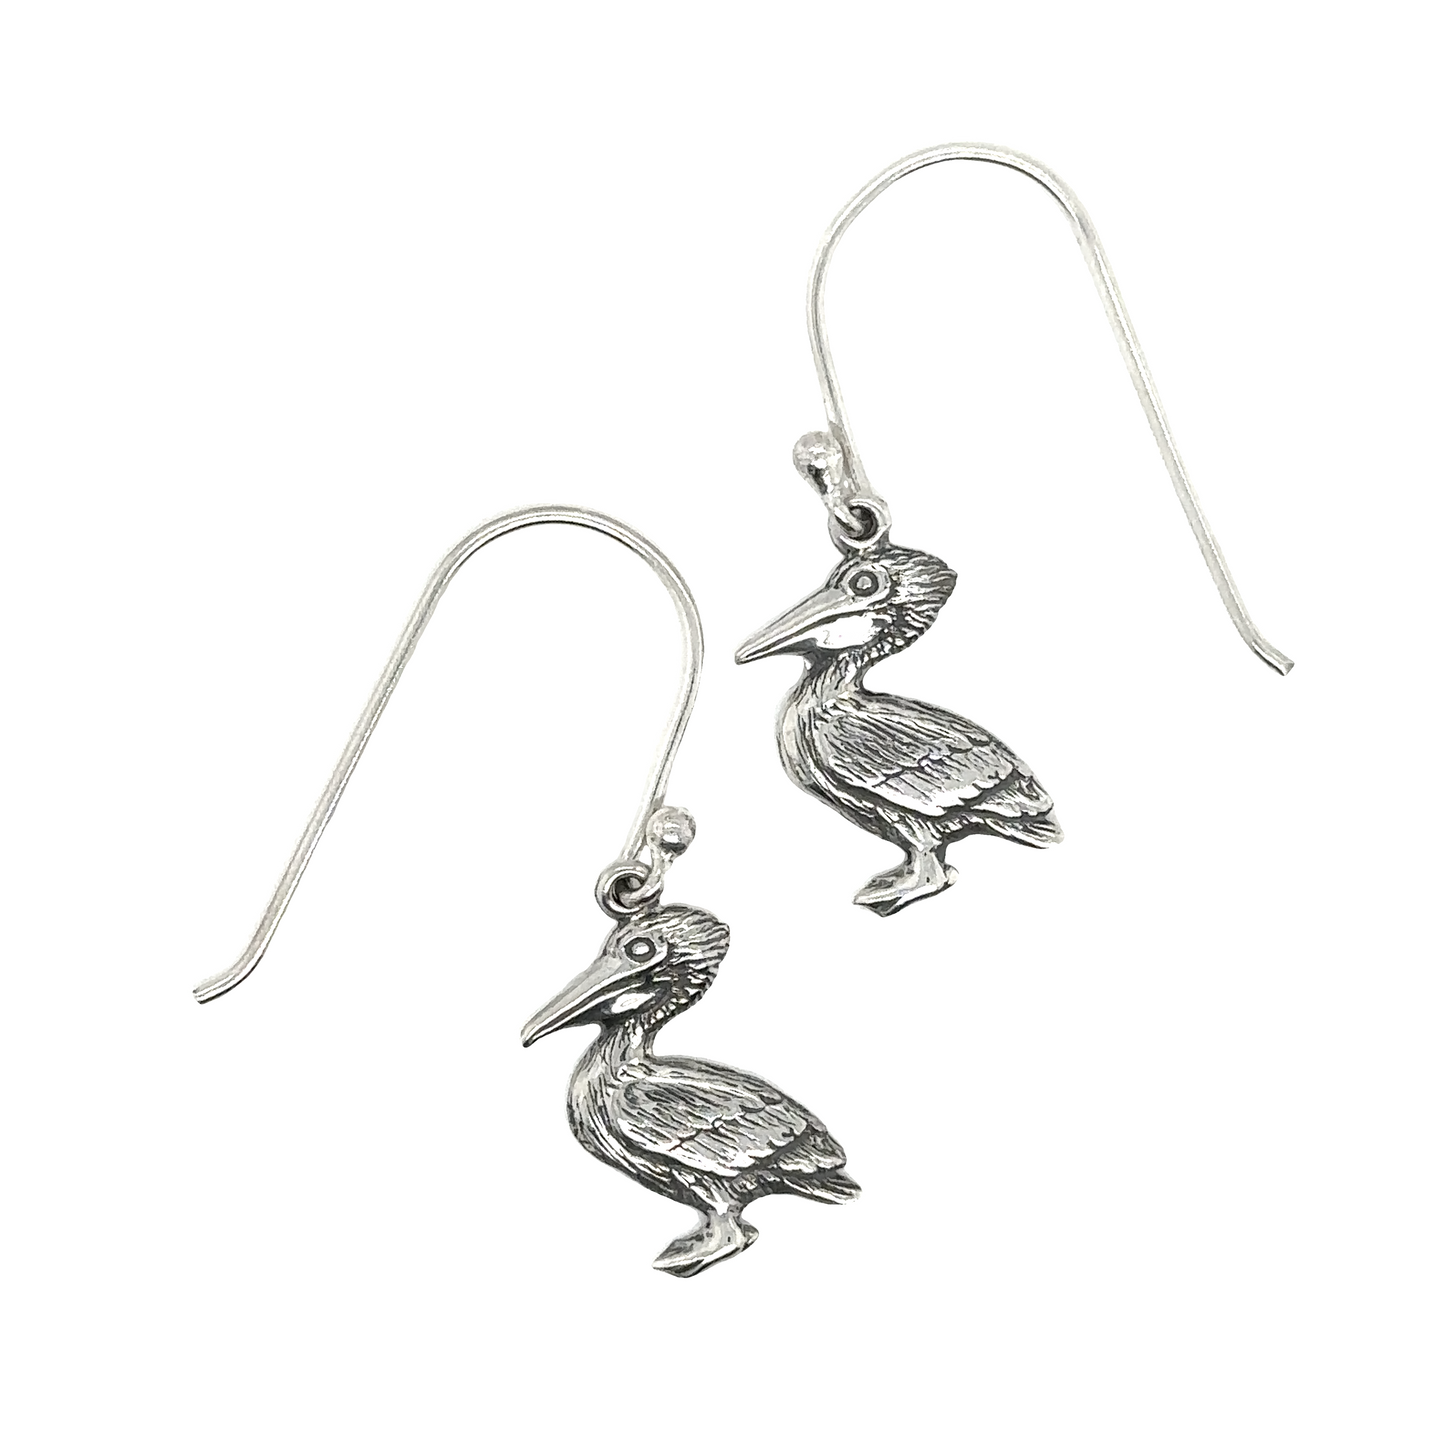 Super Silver Pelican Earrings made of .925 silver on a white background.